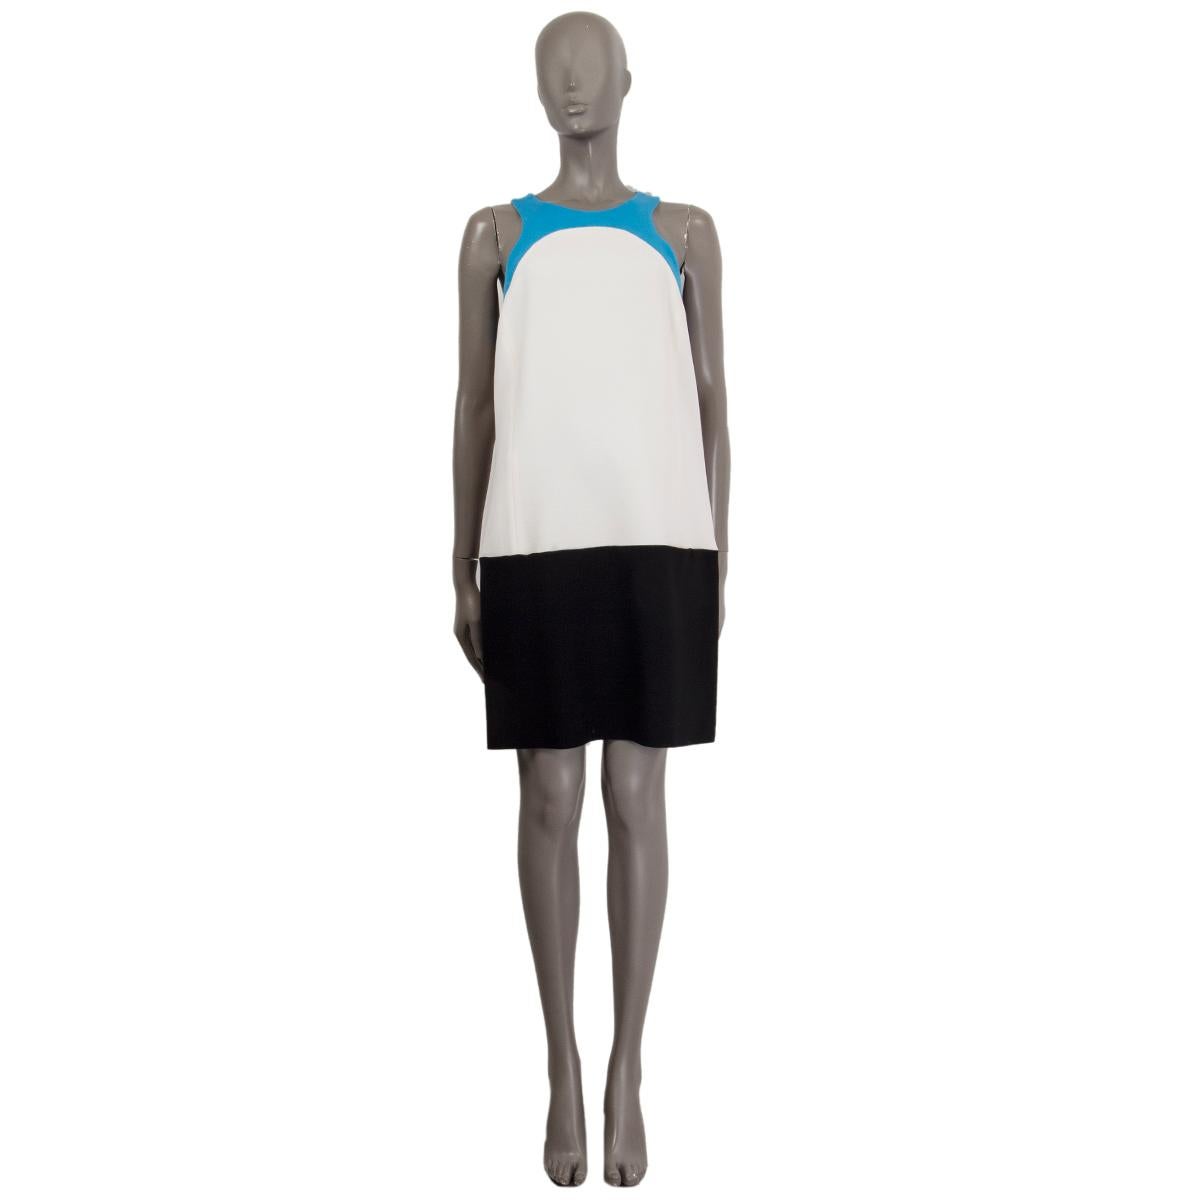 100% authentic Emilio Pucci sleeveless color-block shift dress in sky blue, off-white and black stretch wool (with 2% elastane). Opens with a zipper in the back. Lined in viscose (100%). Has been worn and is in excellent condition.

2012